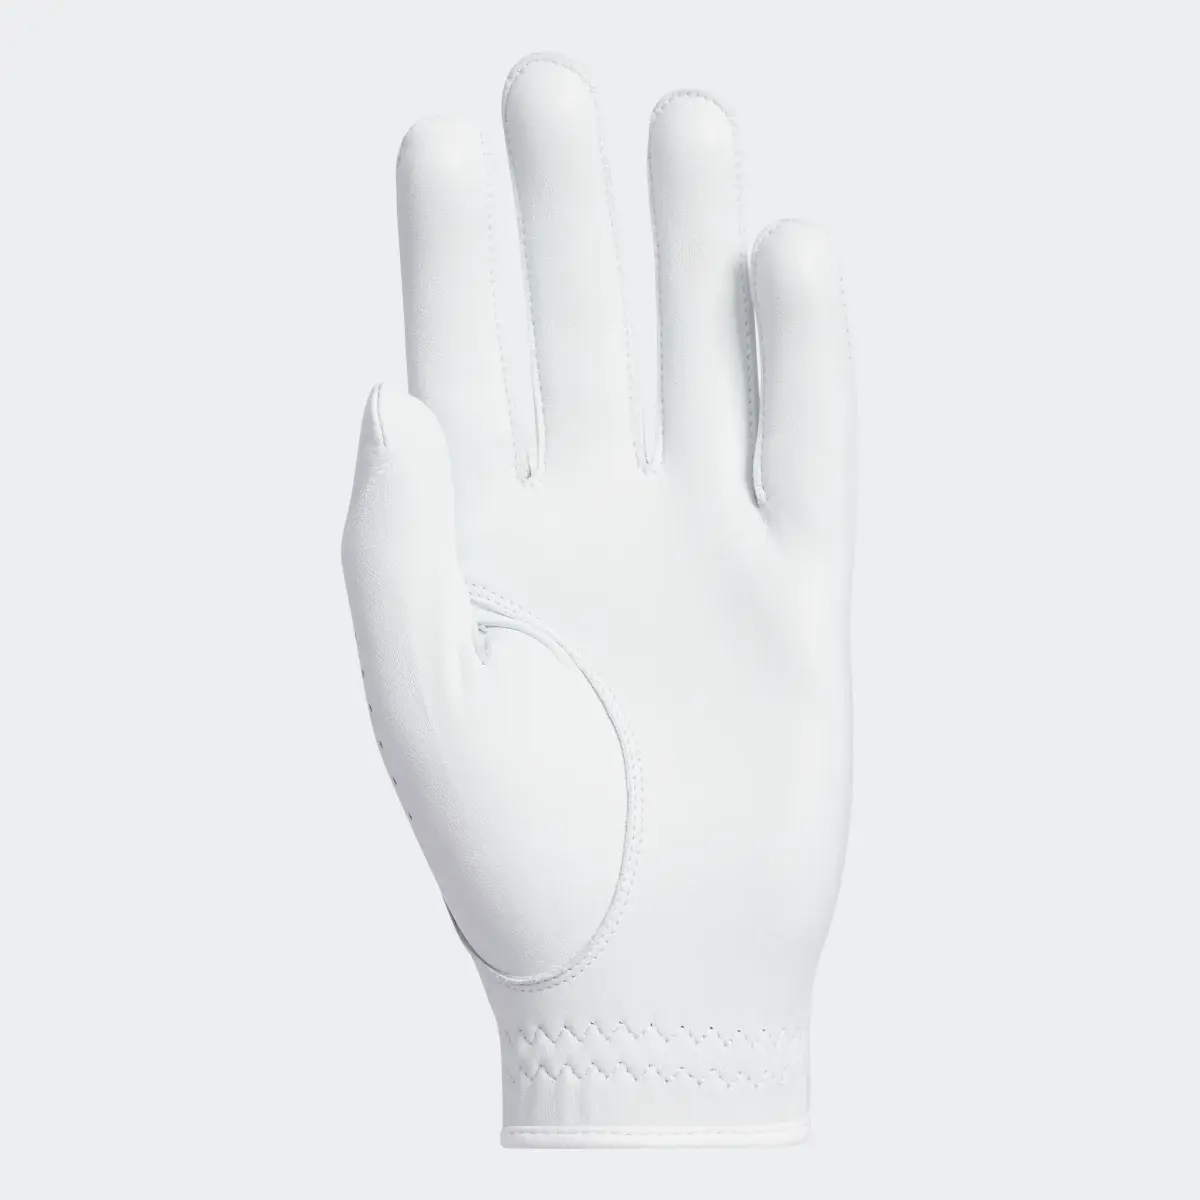 Adidas Ultimate Leather Golf Glove. 3